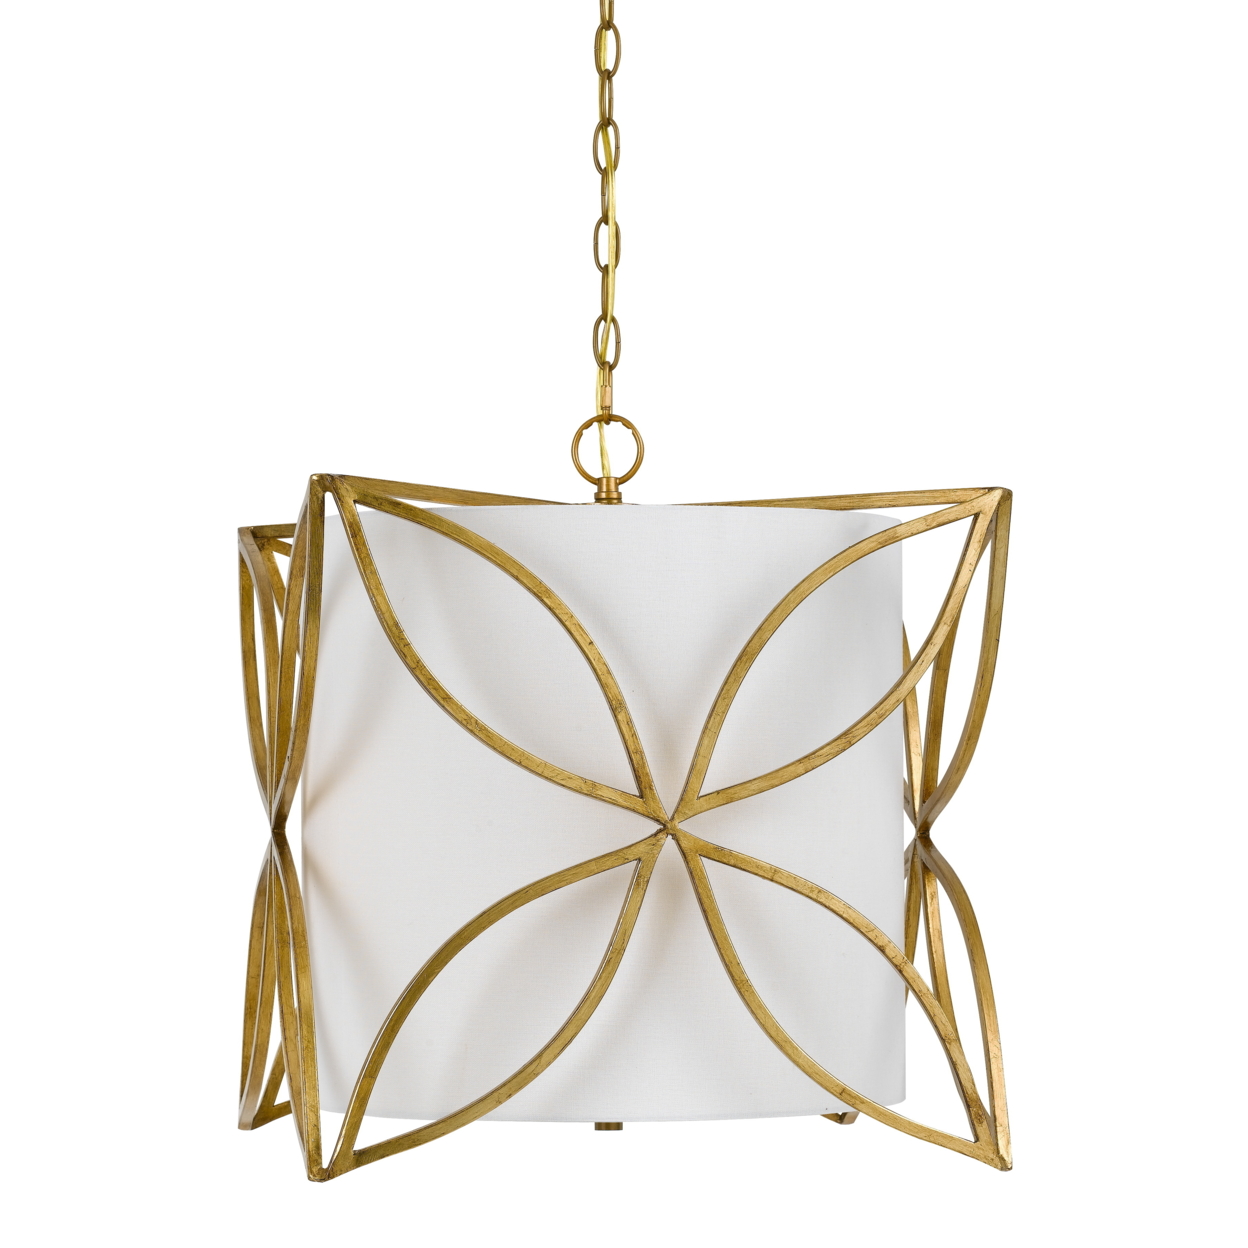 60 X 3 Watt Metal Chandelier With Floral Cut Out, Gold And White- Saltoro Sherpi